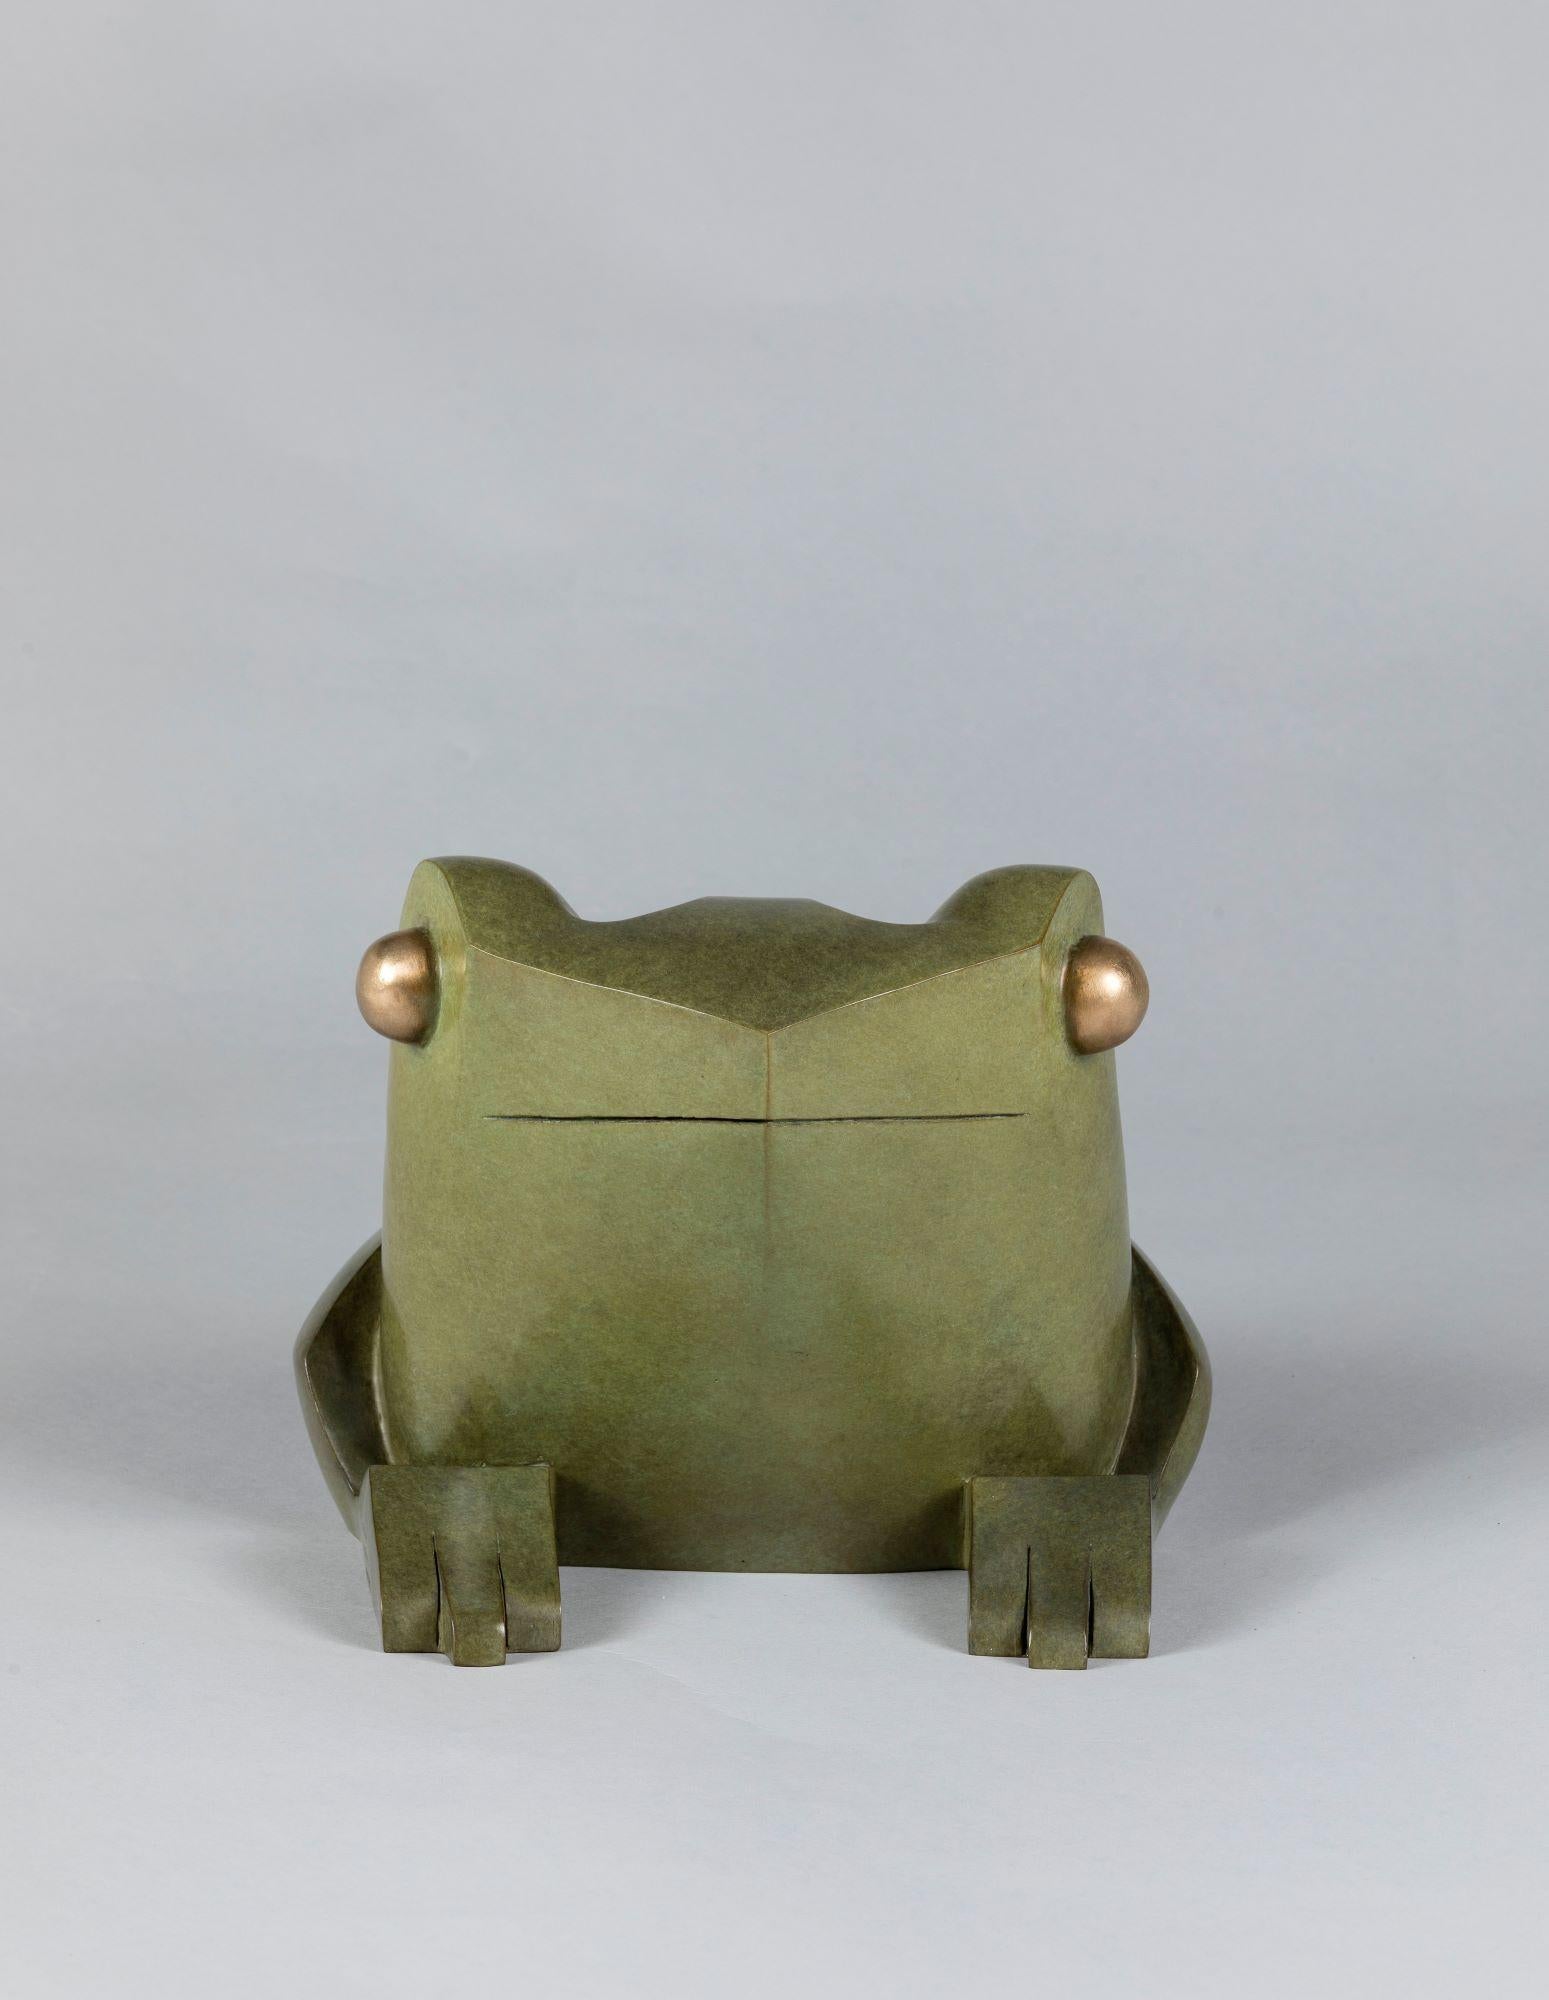 Mafalda by Marie Louise Sorbac -  Bronze animal sculpture, frog, green colour For Sale 2